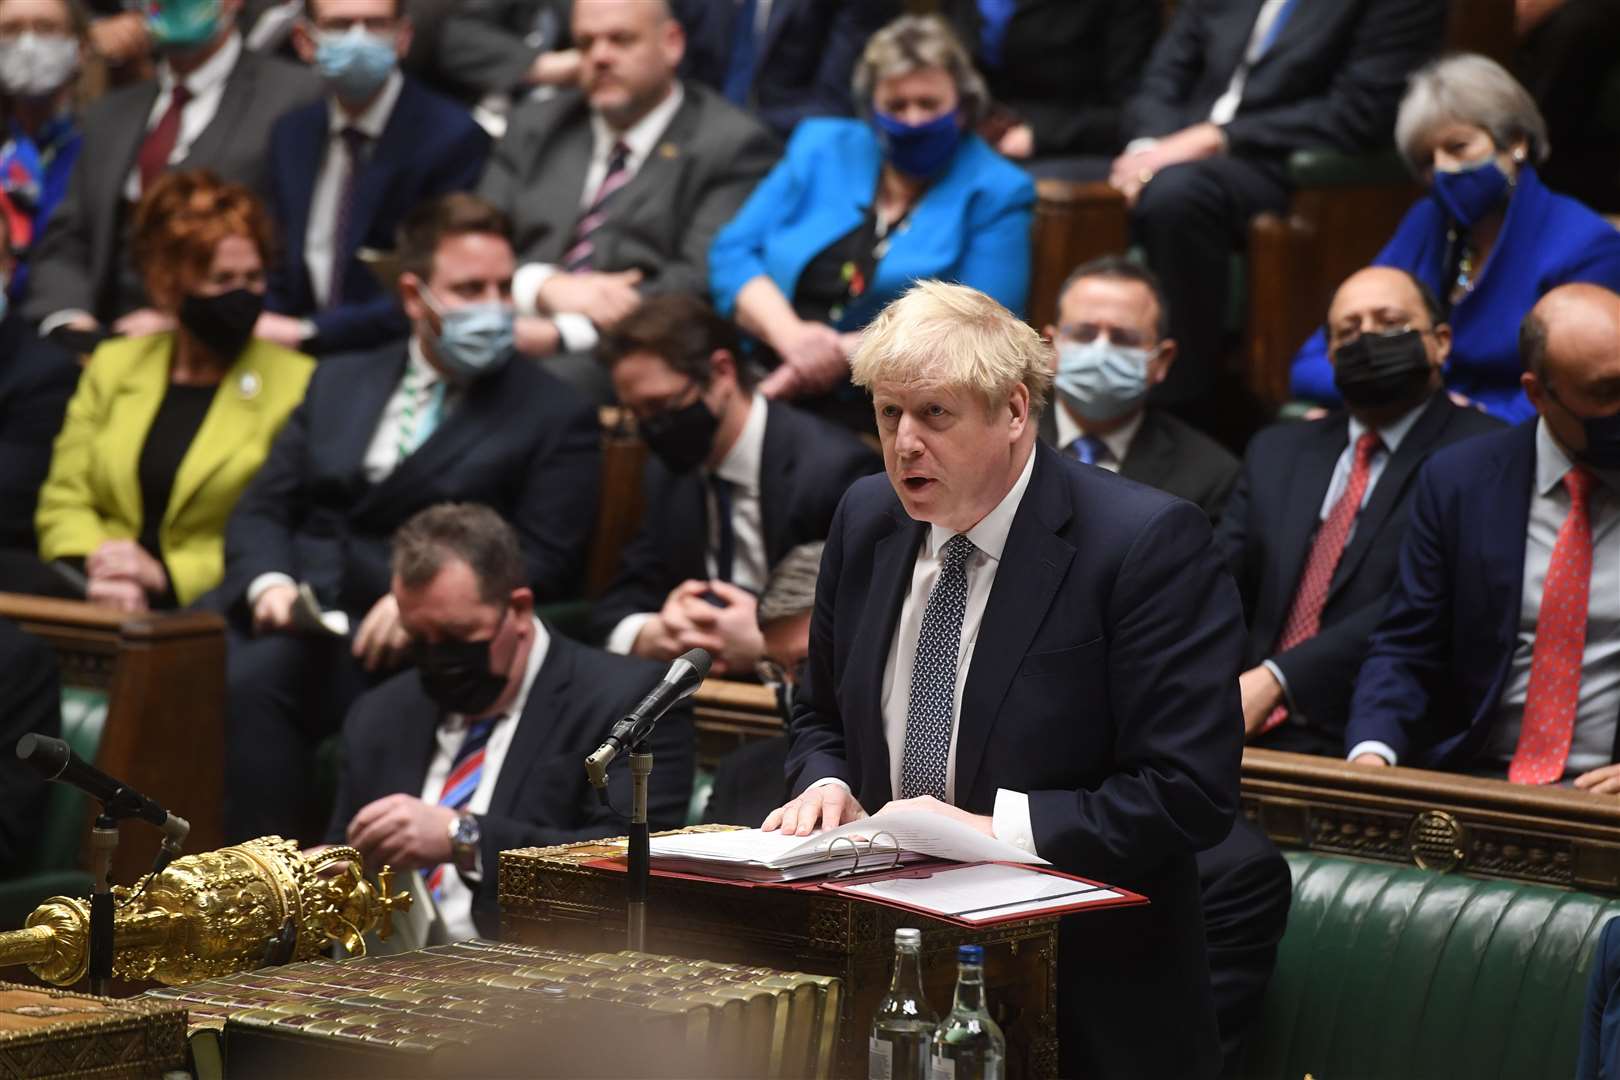 Boris Johnson told MPs he had been at a ‘bring your own booze’ No 10 drinks party in May 2020 but thought it was a work event (UK Parliament/Jessica Taylor/PA)